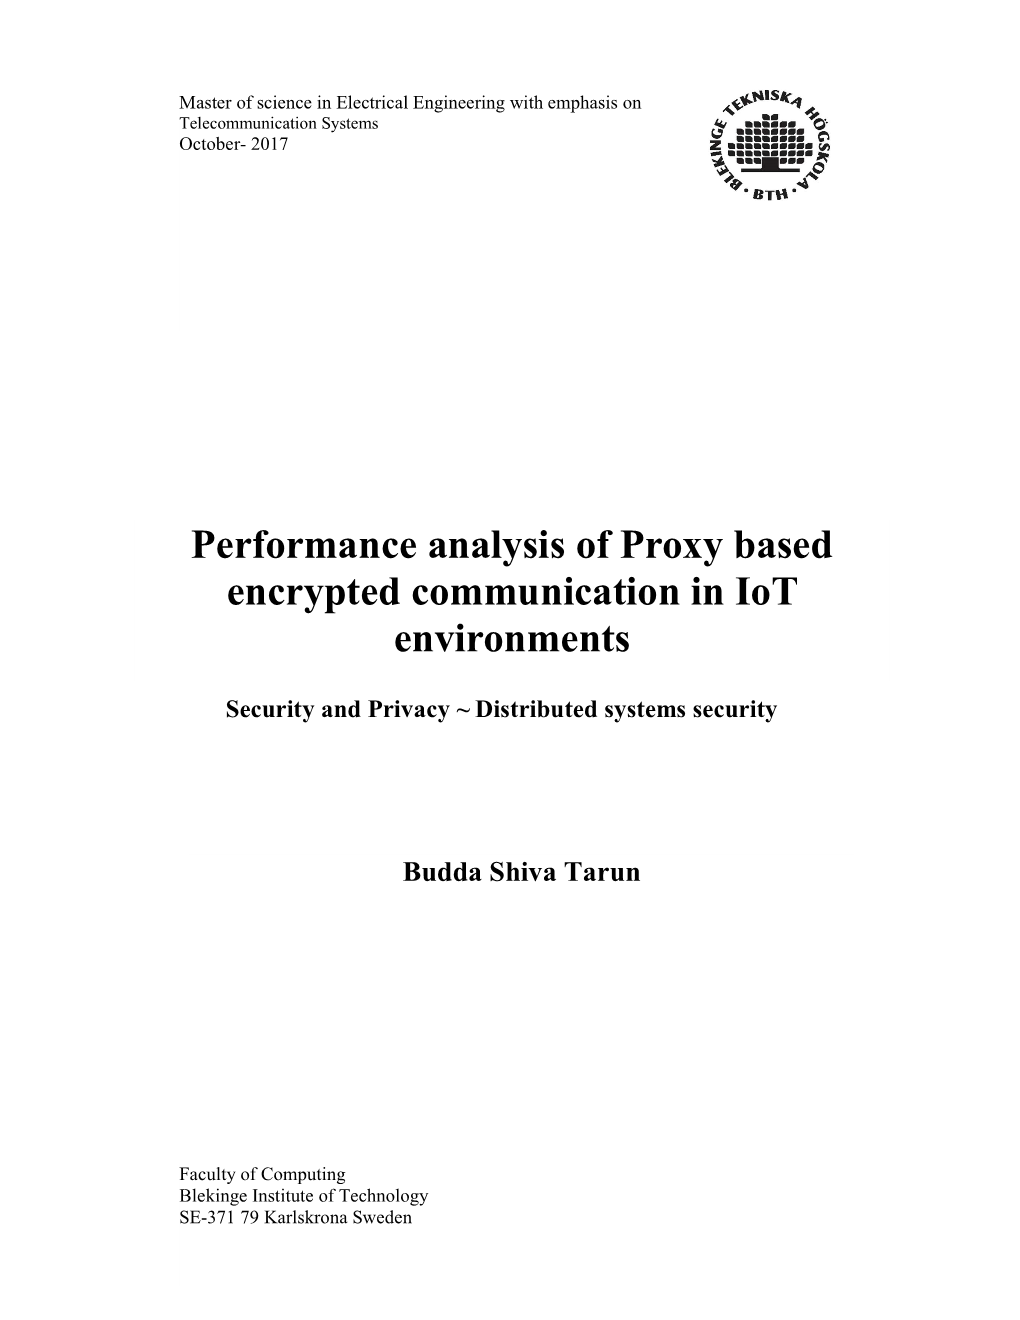 Performance Analysis of Proxy Based Encrypted Communication in Iot Environments